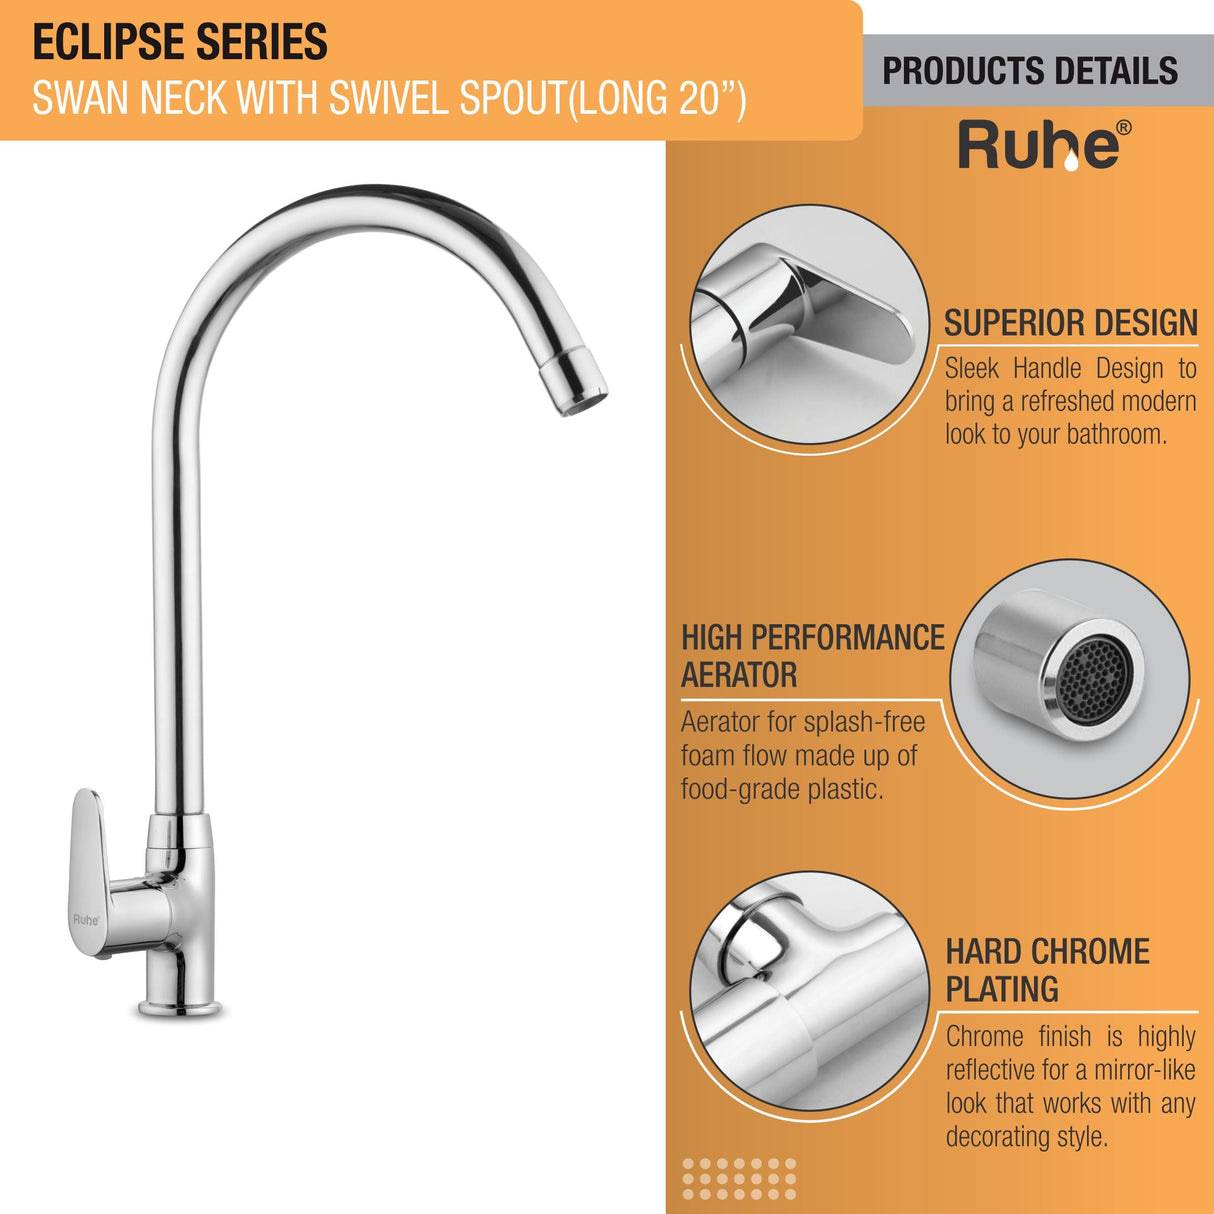 Eclipse Swan Neck with Large (20 inches) Round Swivel Spout Brass Faucet product details